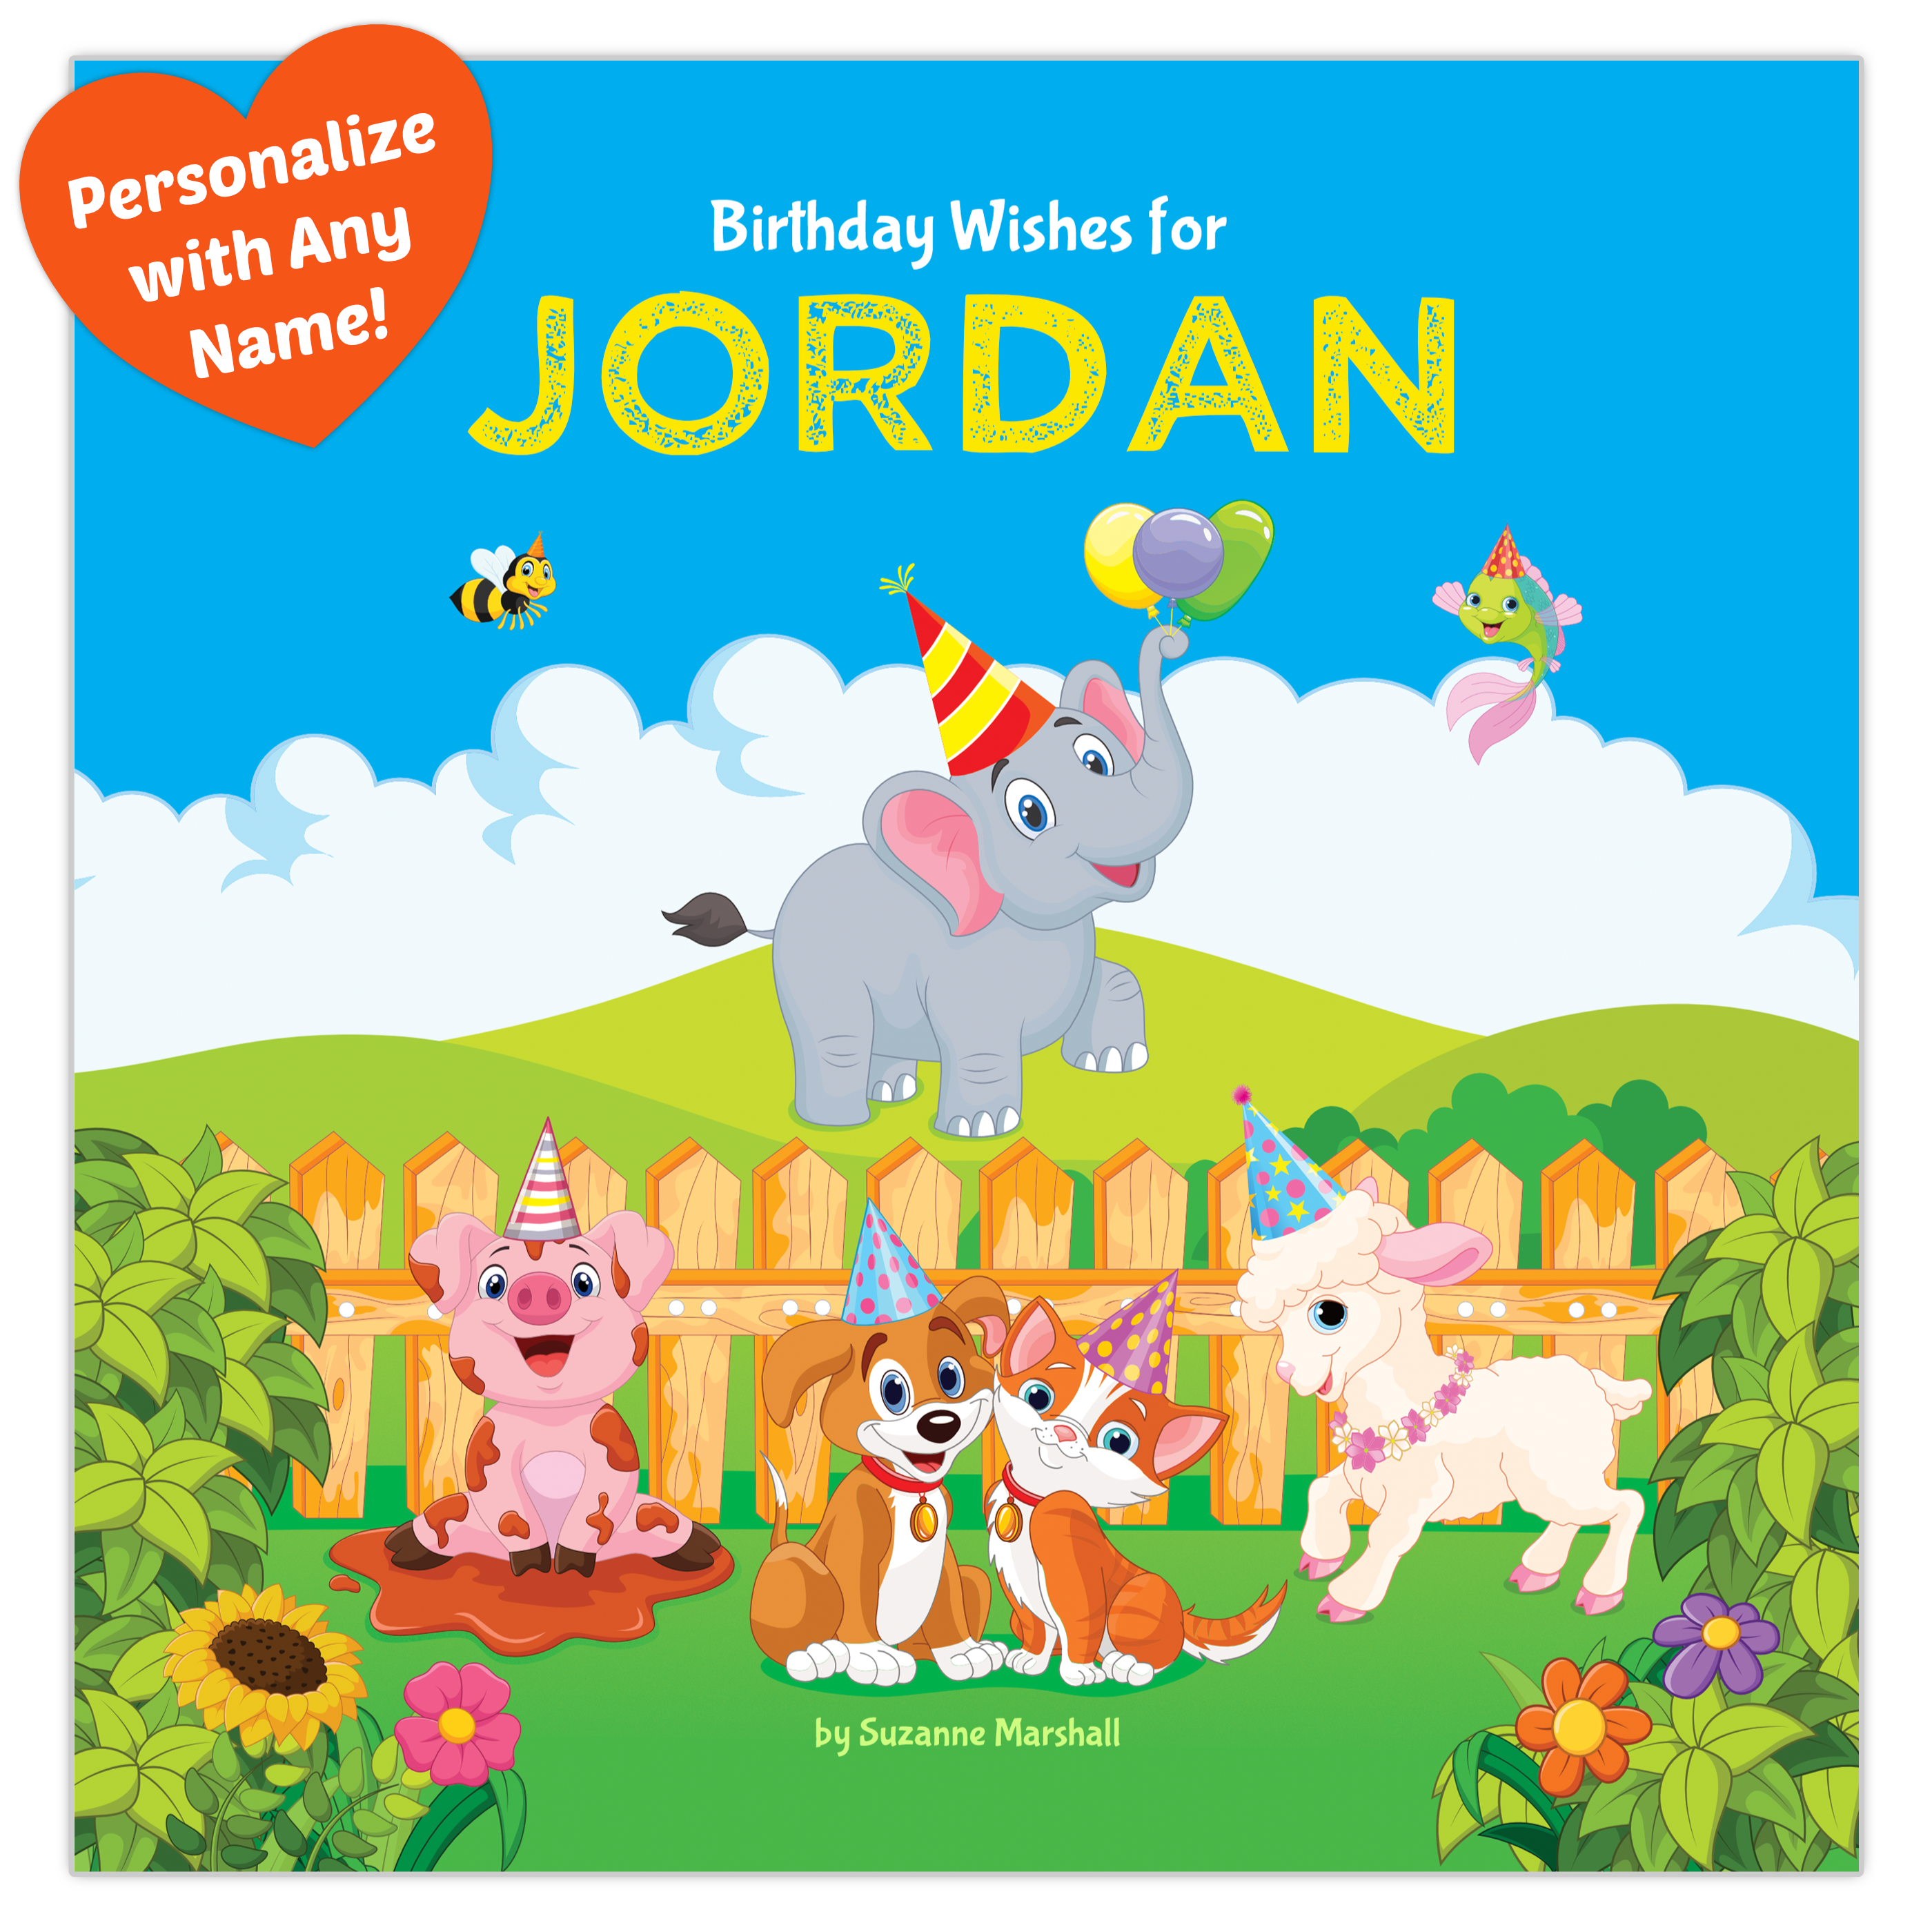 Birthday Wishes, 1 year old birthday gifts and personalized book